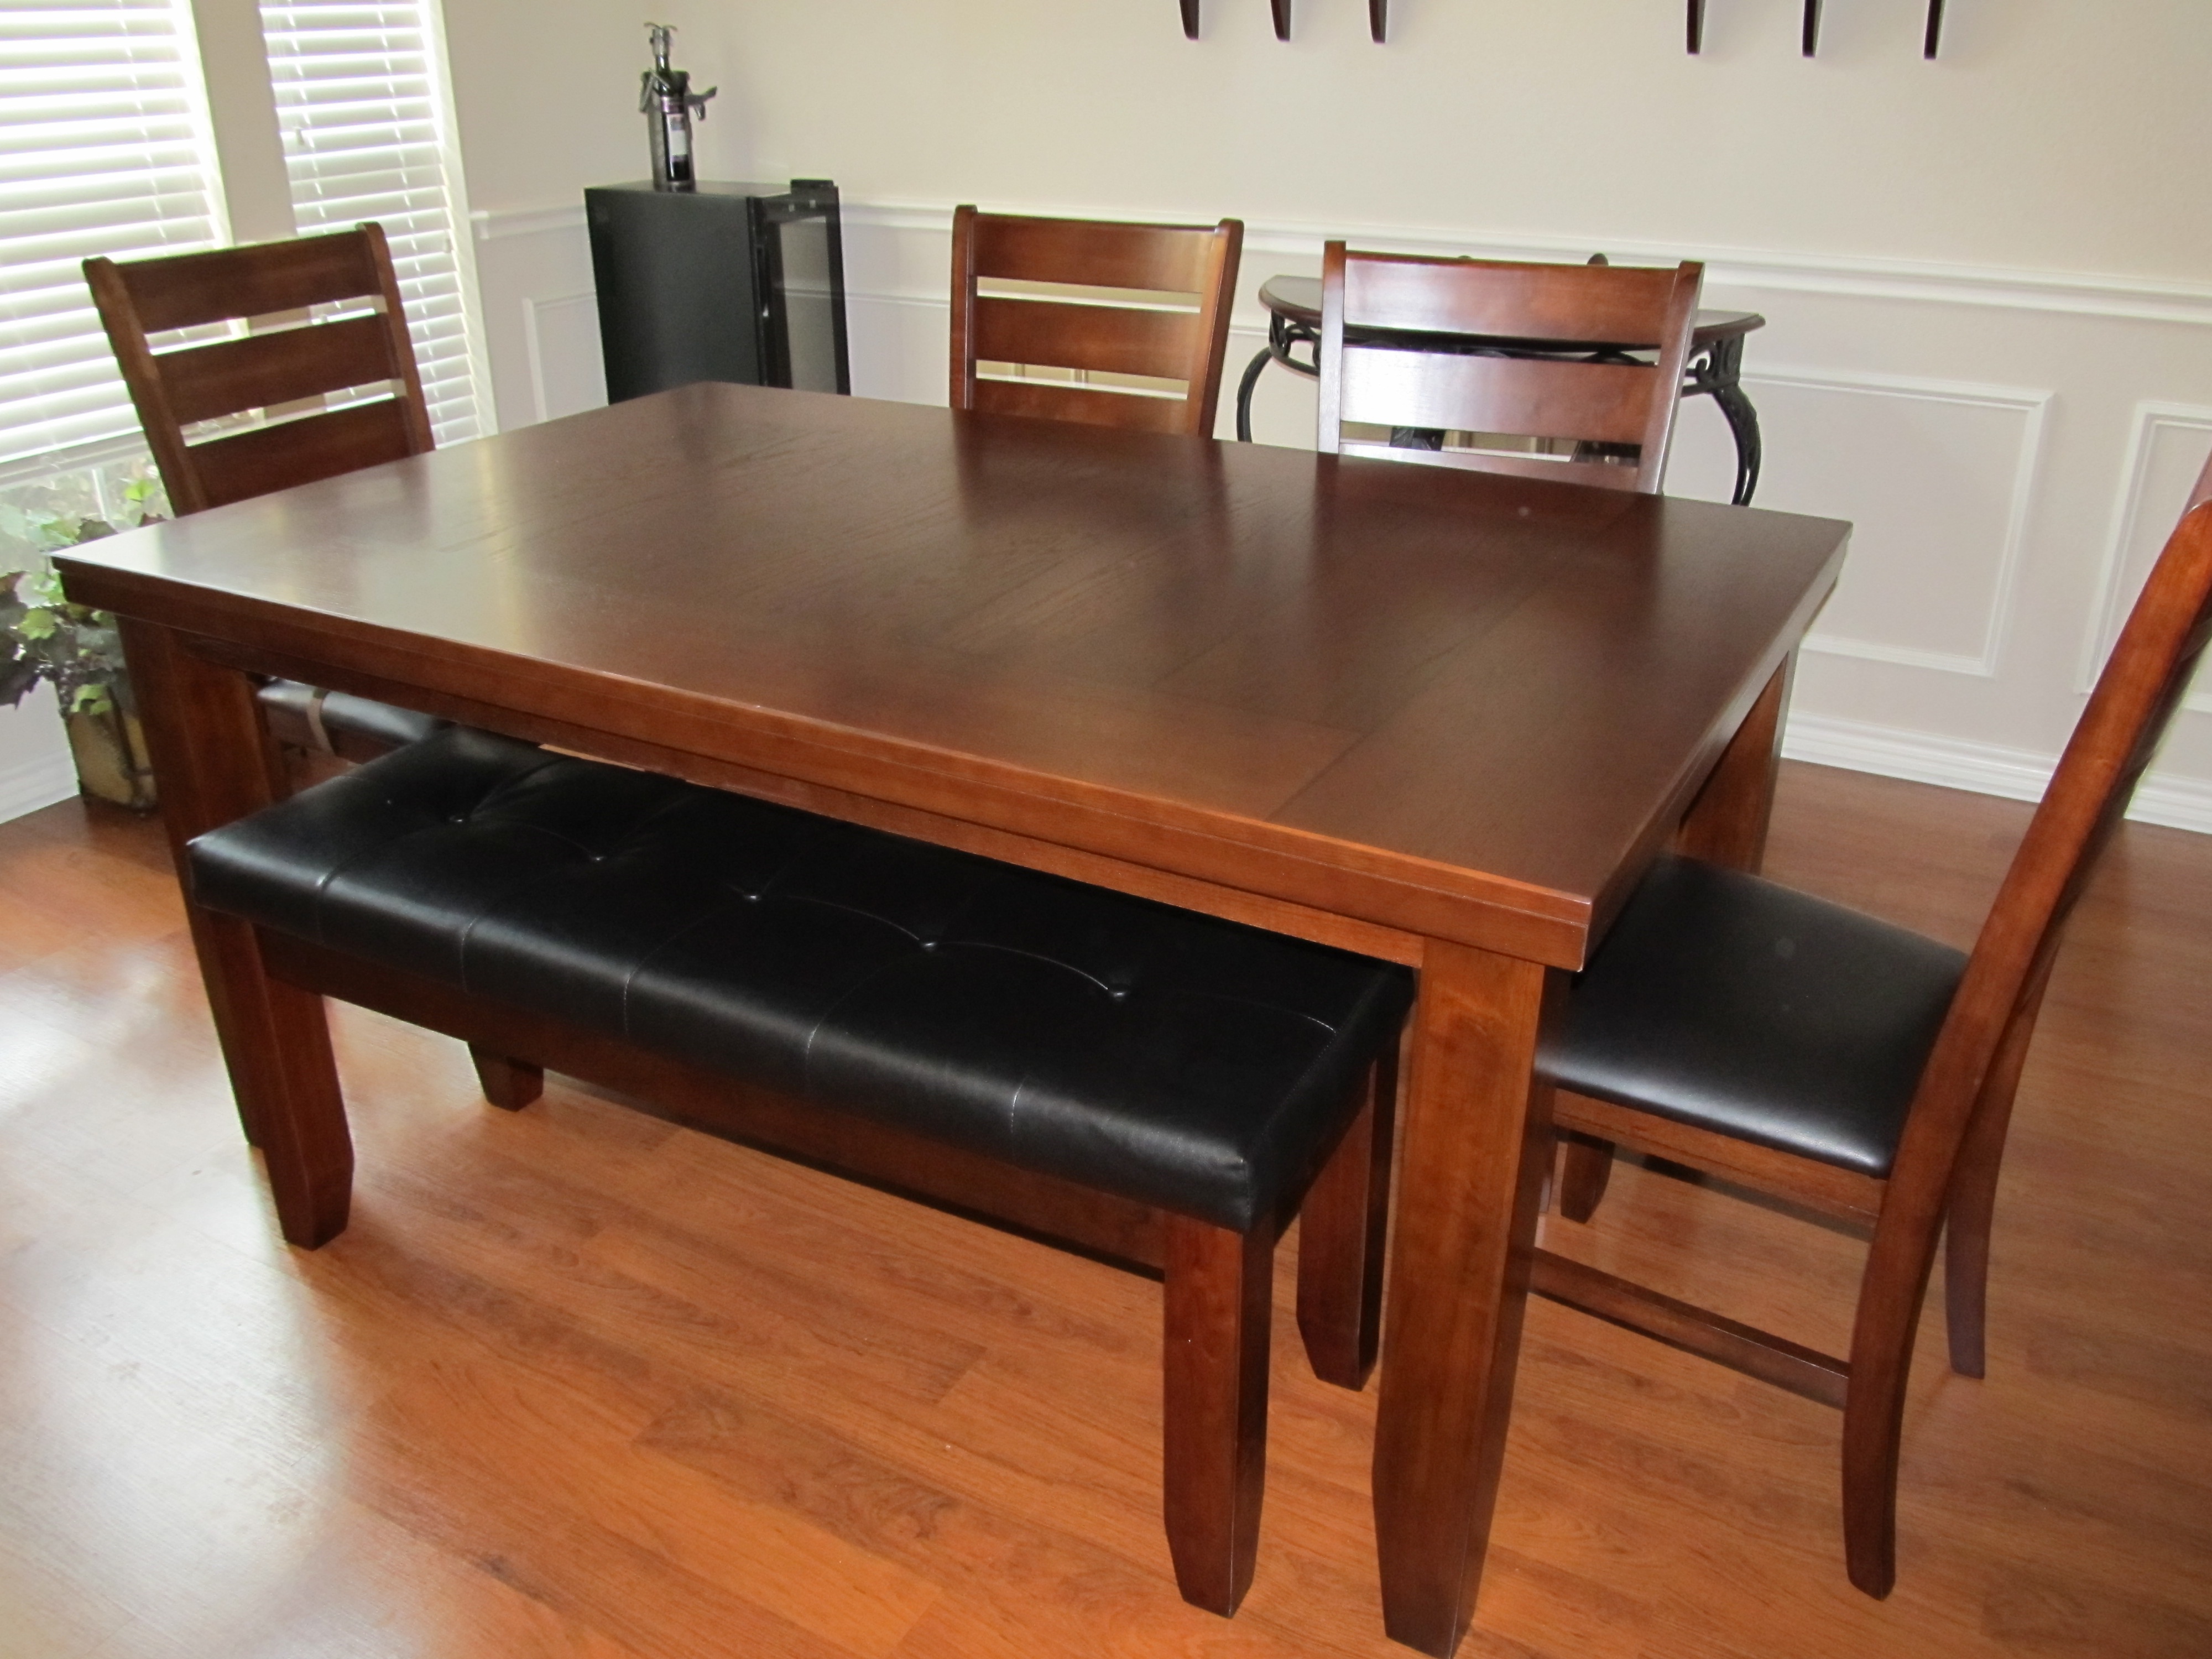 Dining Room Table With Built In Bench